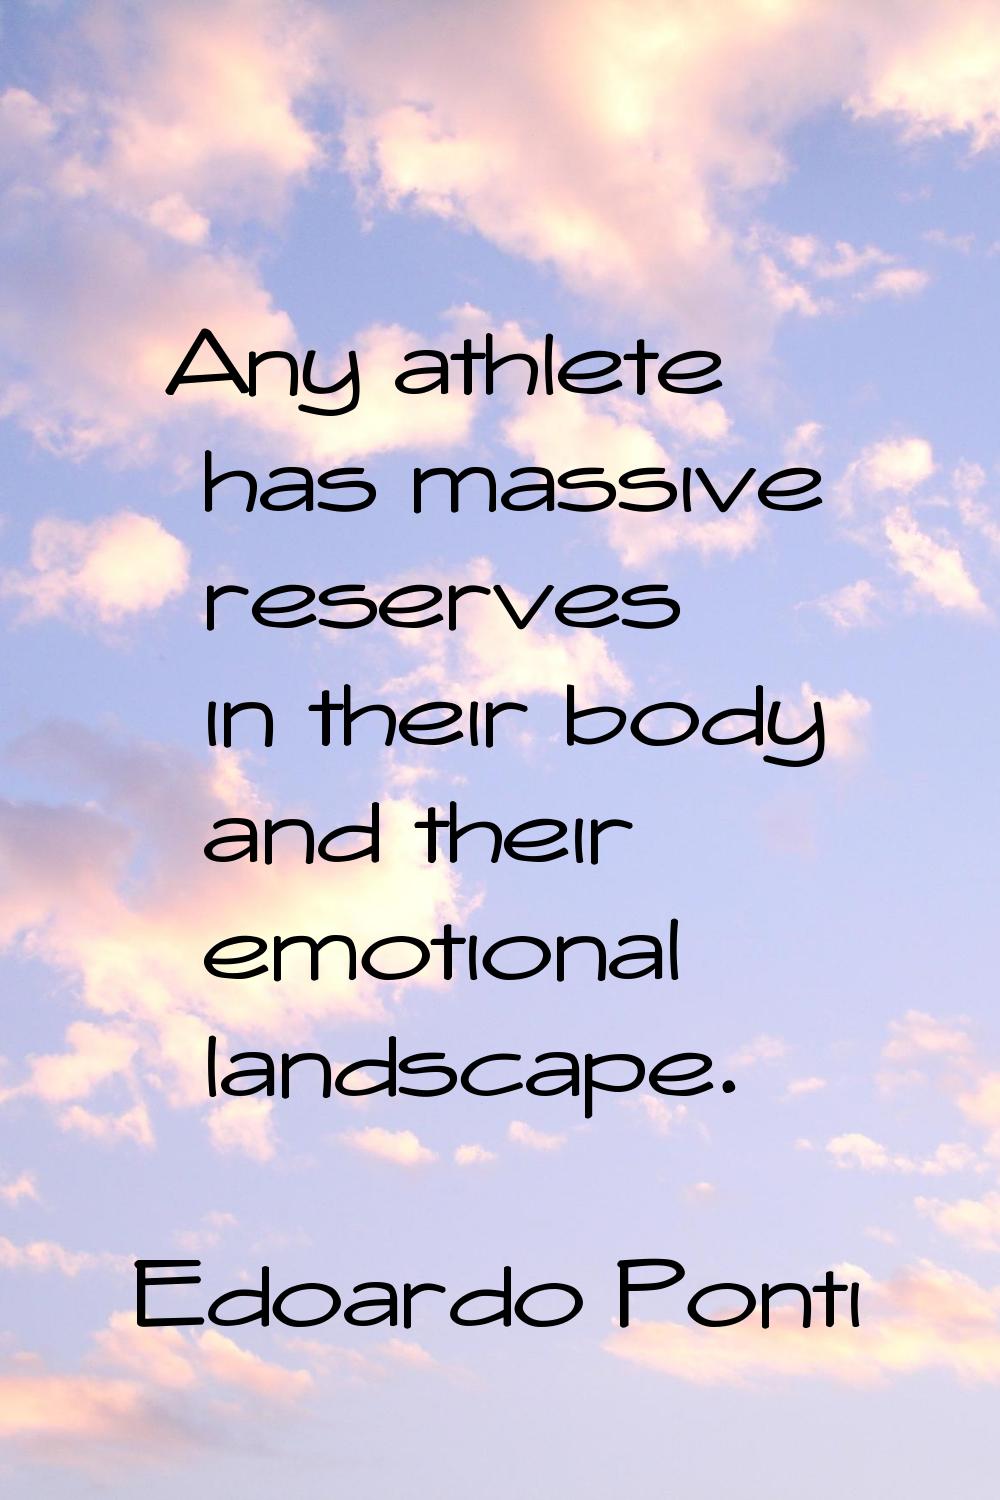 Any athlete has massive reserves in their body and their emotional landscape.